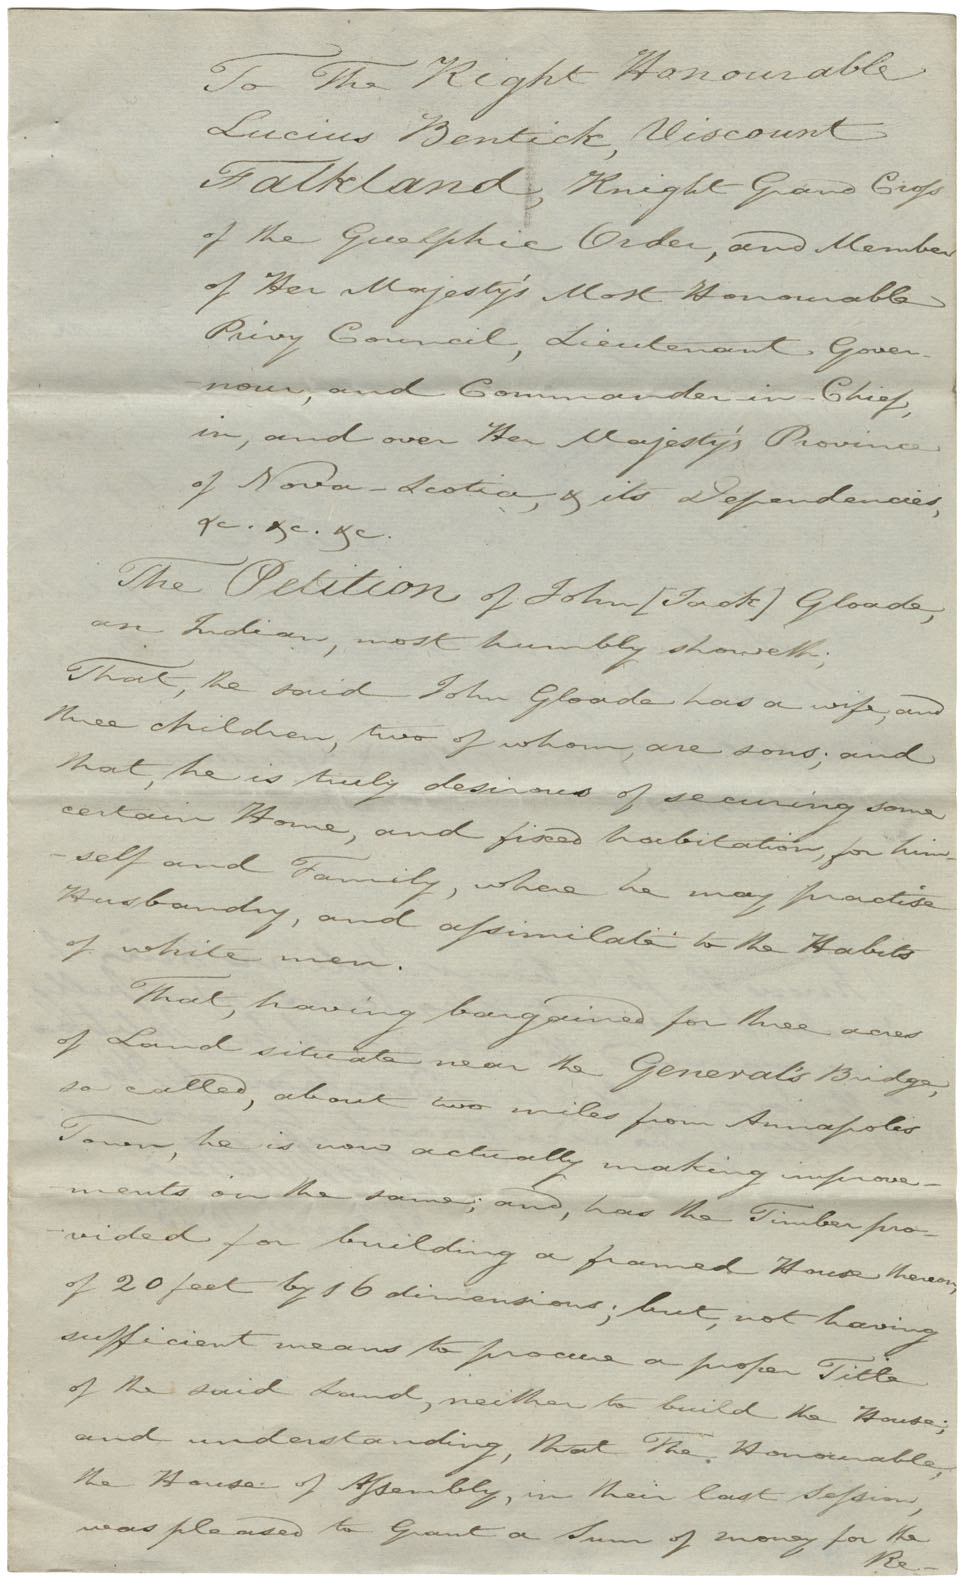 John Gloade's petition to the Lieutenant-Governor for land near Annapolis. 